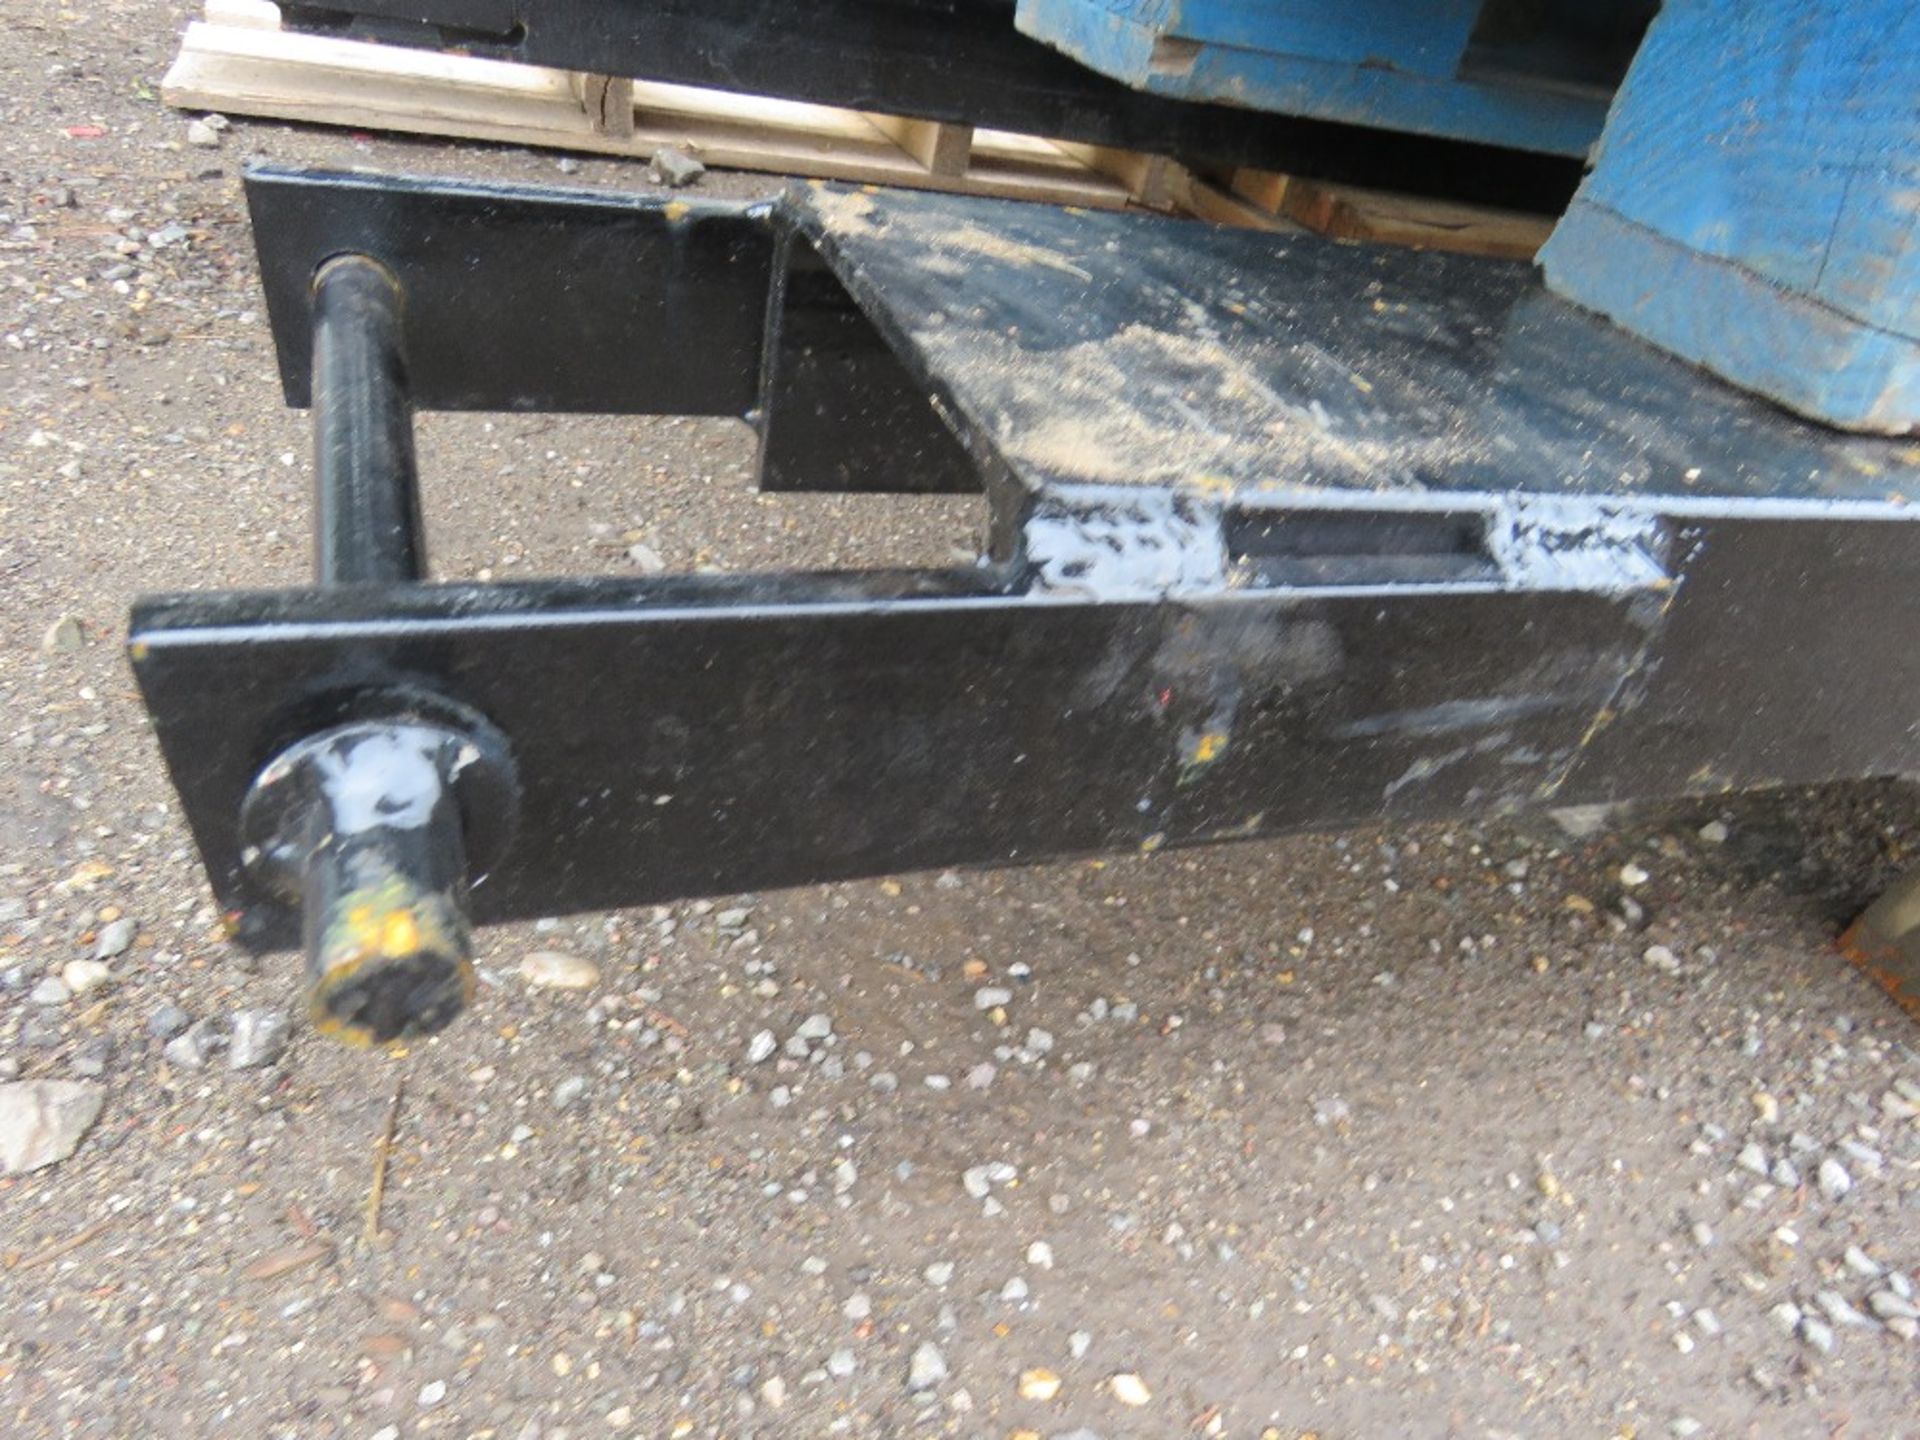 PAIR OF 6FT LENGTH FORKLIFT EXTENSION TINES/SLEEVES, 6" WIDTH, WITH LOCKING PINS. - Image 2 of 3